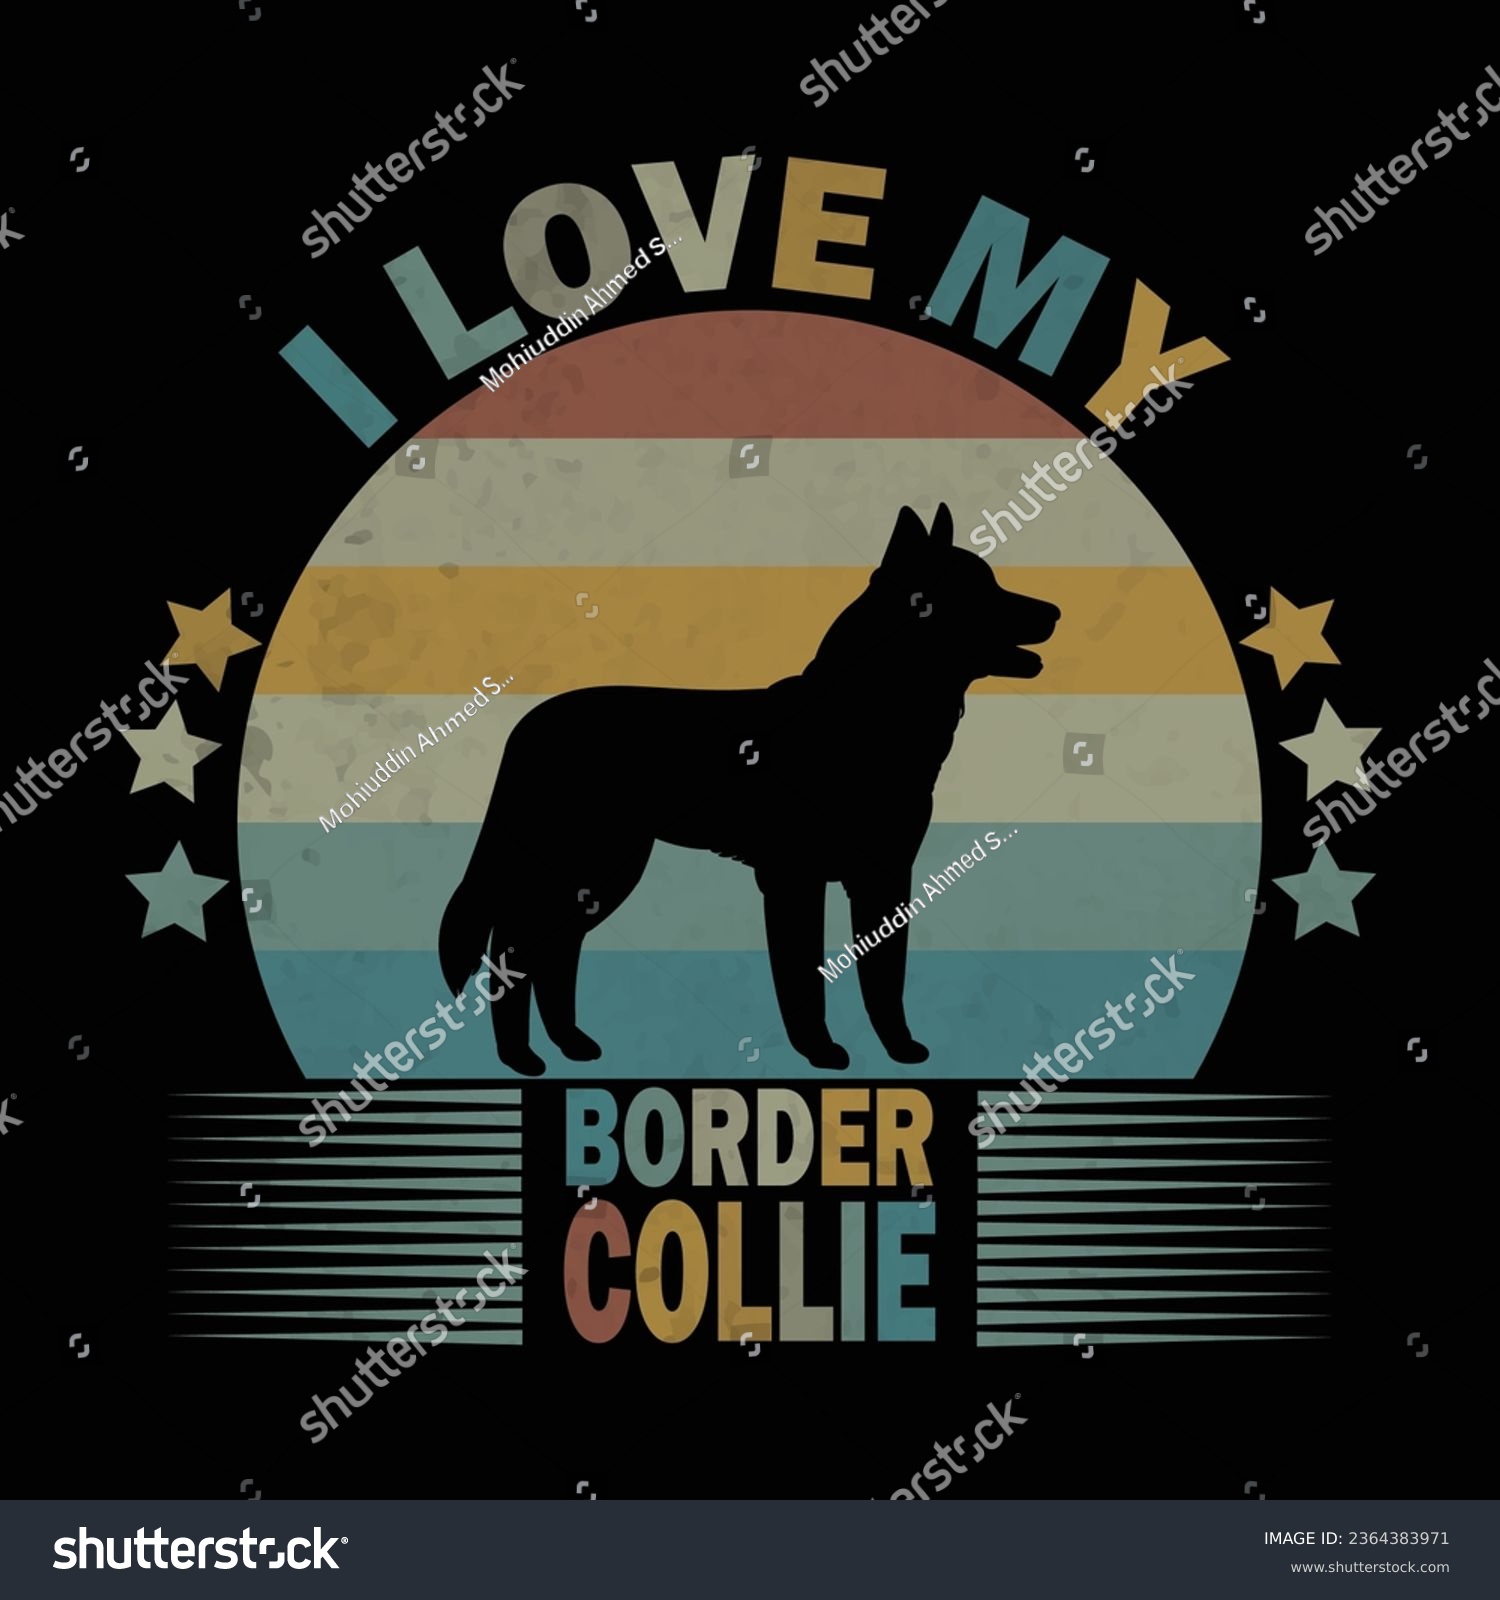 SVG of 
I LOVE MY BORDER COLLIE illustrations with patches for t-shirts and other uses svg